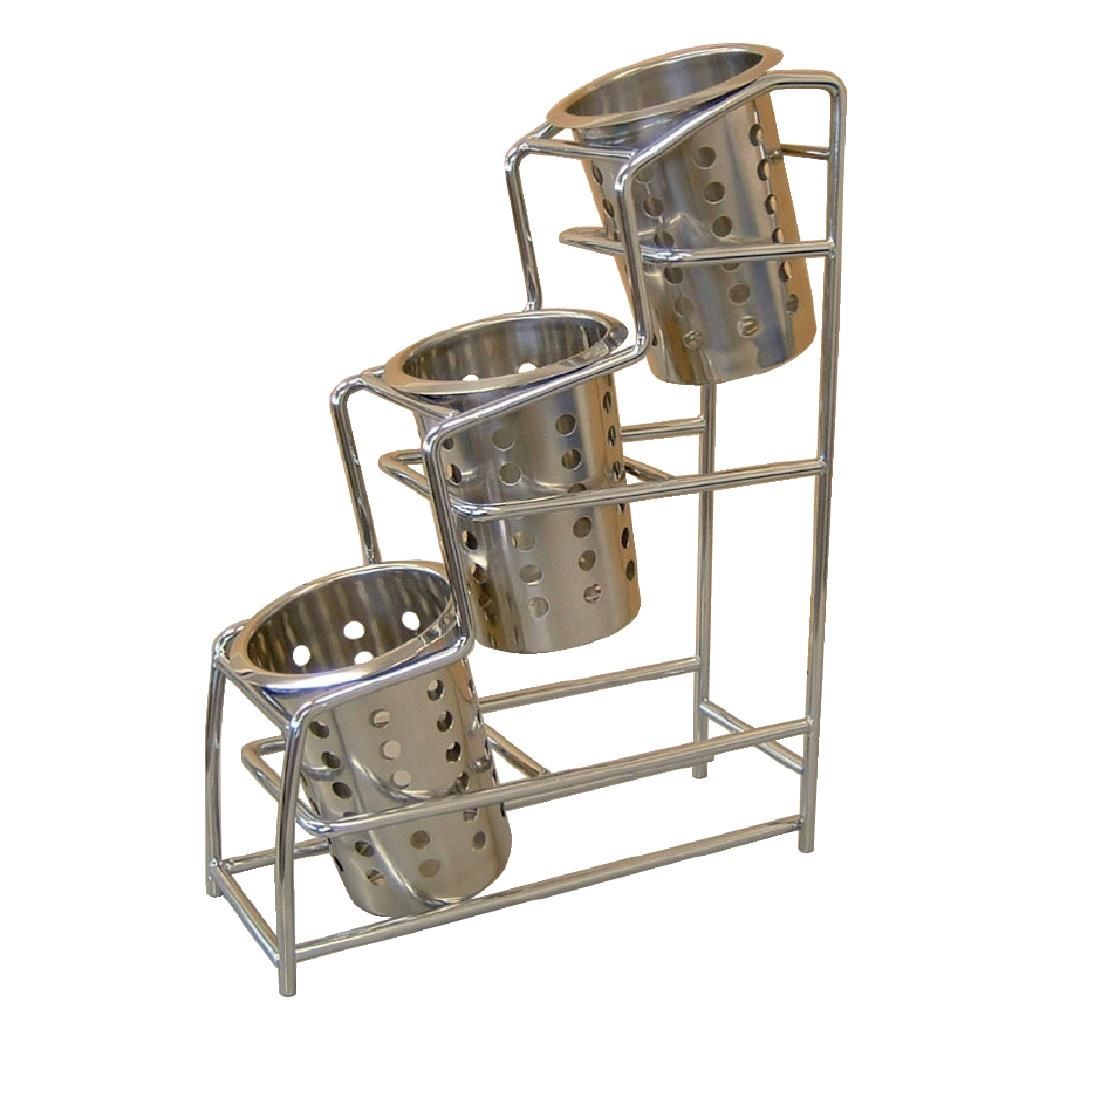 CE685 Craven Chrome Plated Cutlery 3 Pot Holder JD Catering Equipment Solutions Ltd